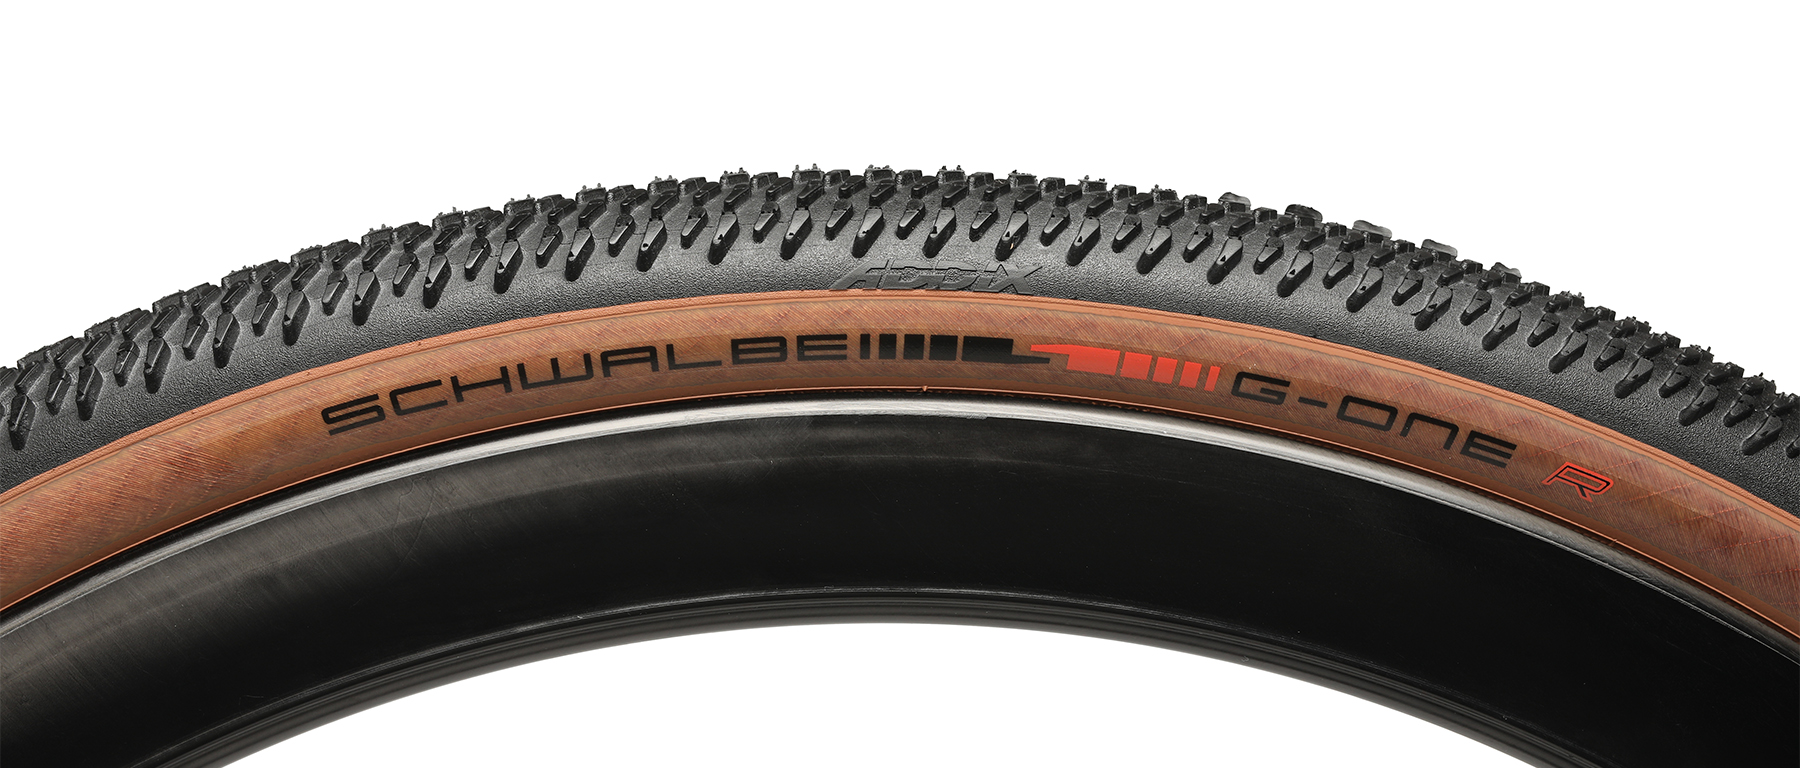 Schwalbe G-One R Tubeless Gravel Tire